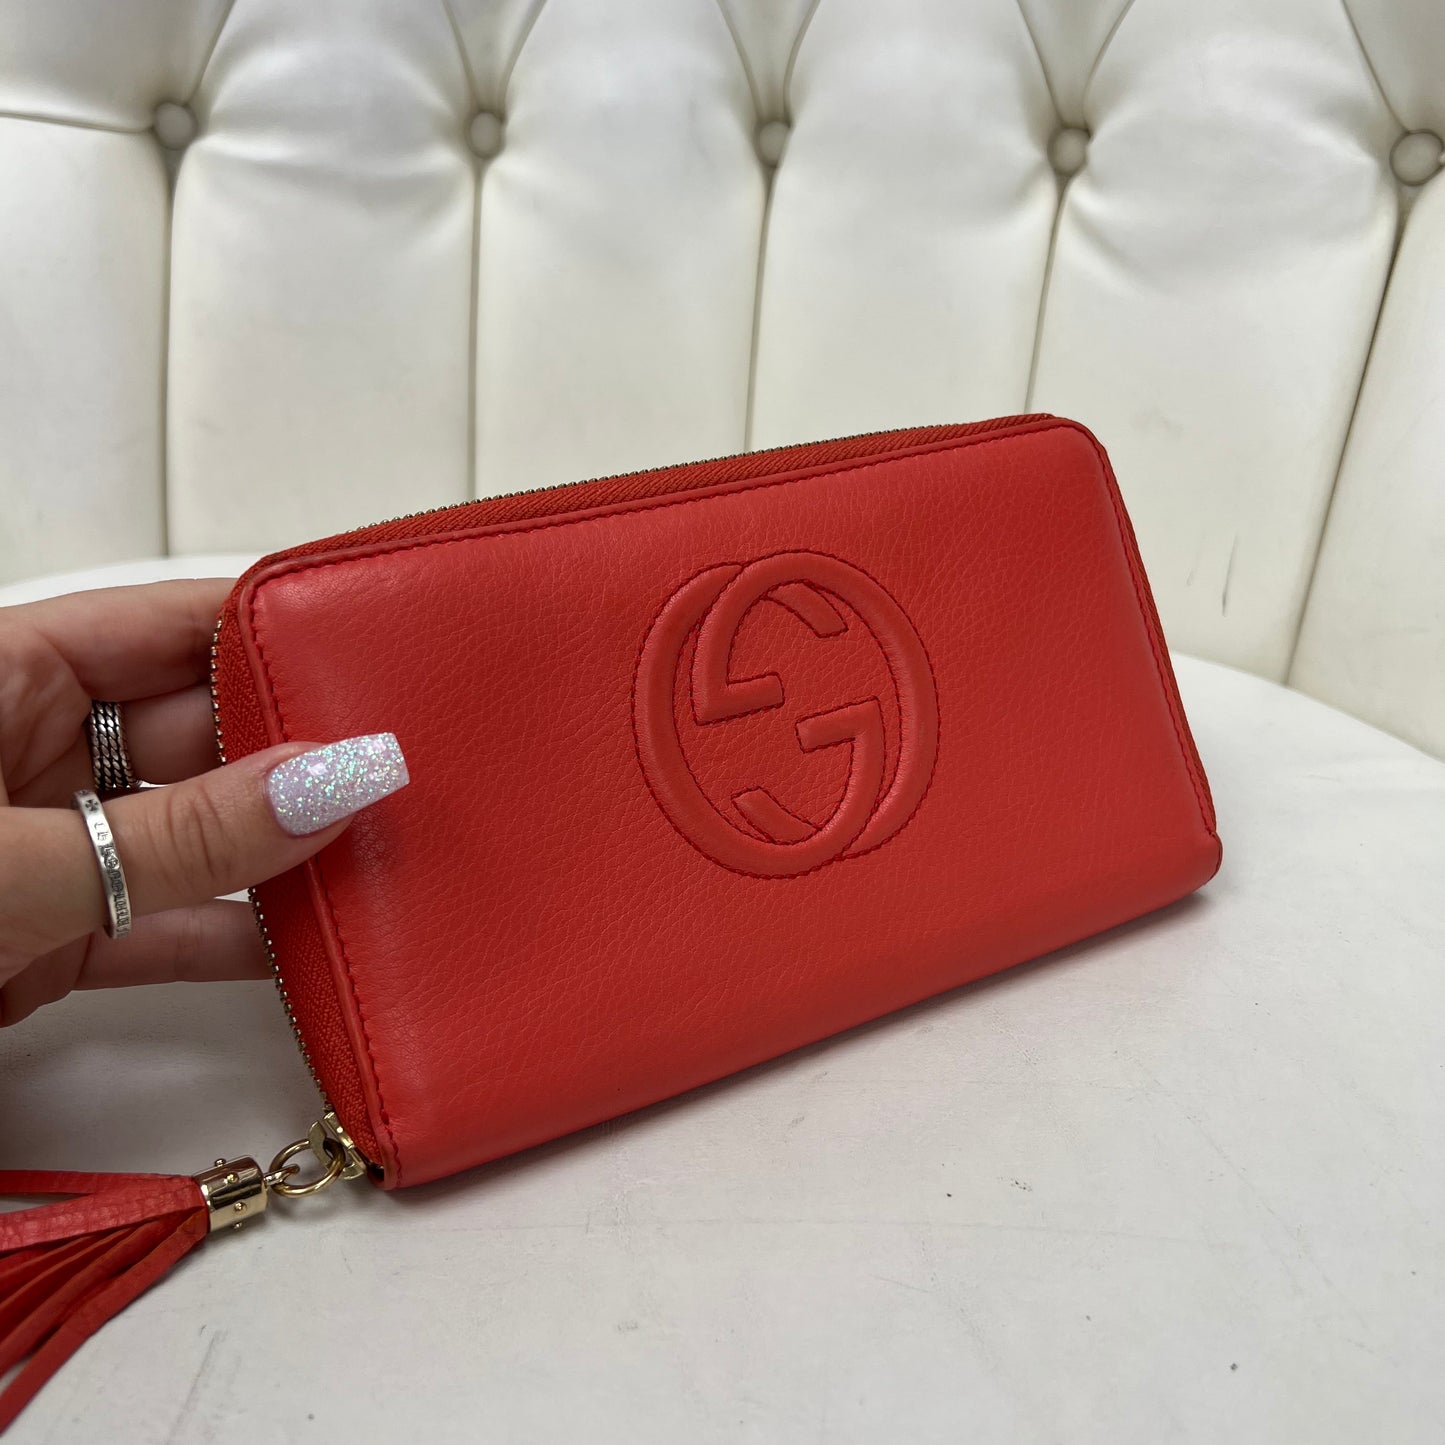 Gucci Pebbled Leather Wallet